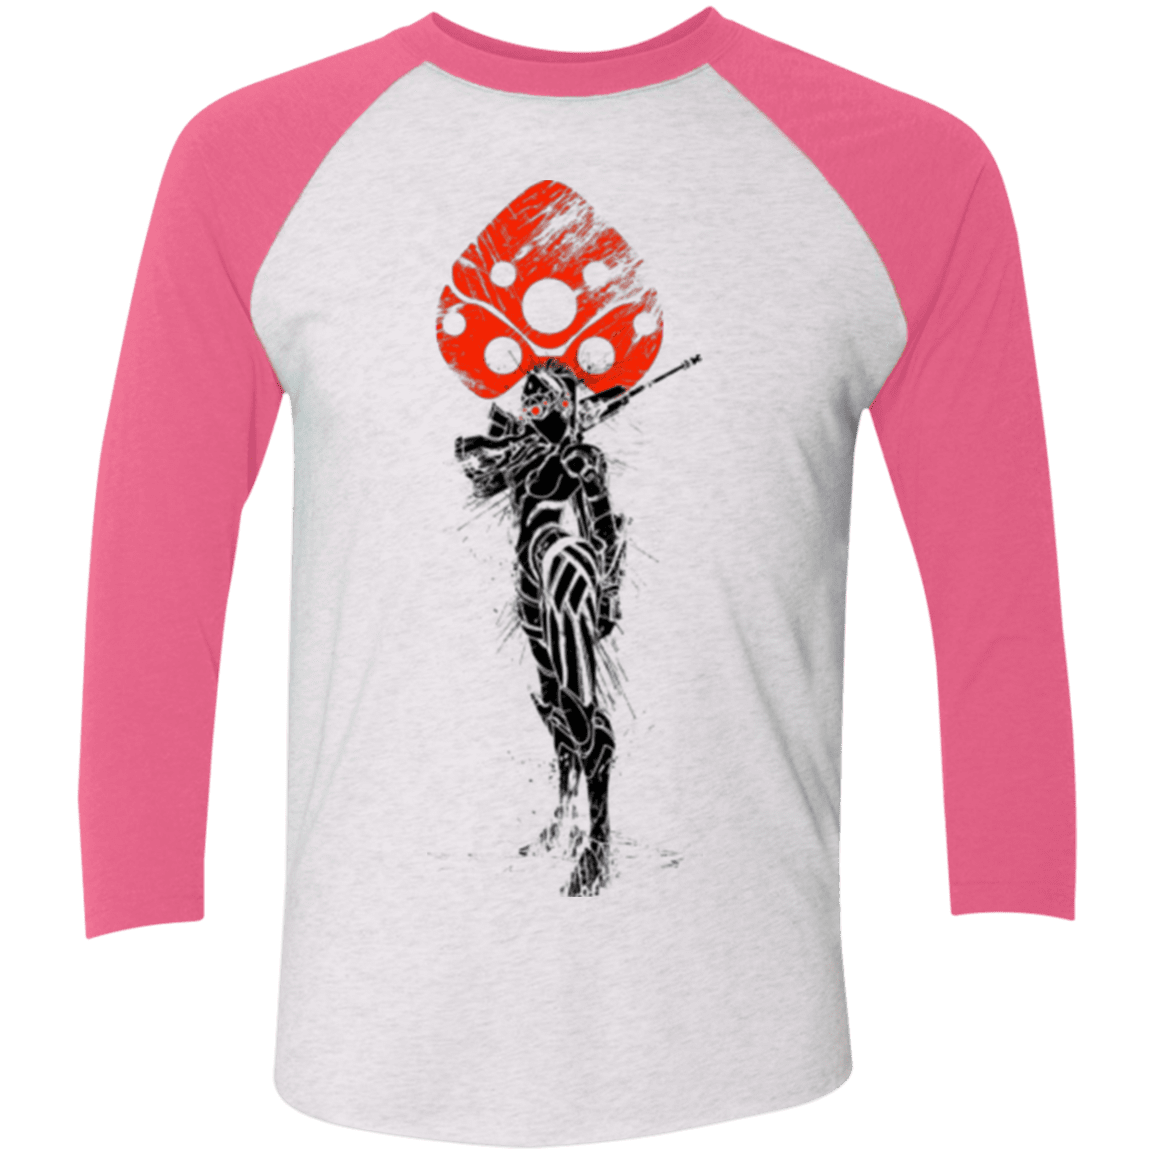 T-Shirts Heather White/Vintage Pink / X-Small TRADITIONAL WIDOW MAKER Men's Triblend 3/4 Sleeve